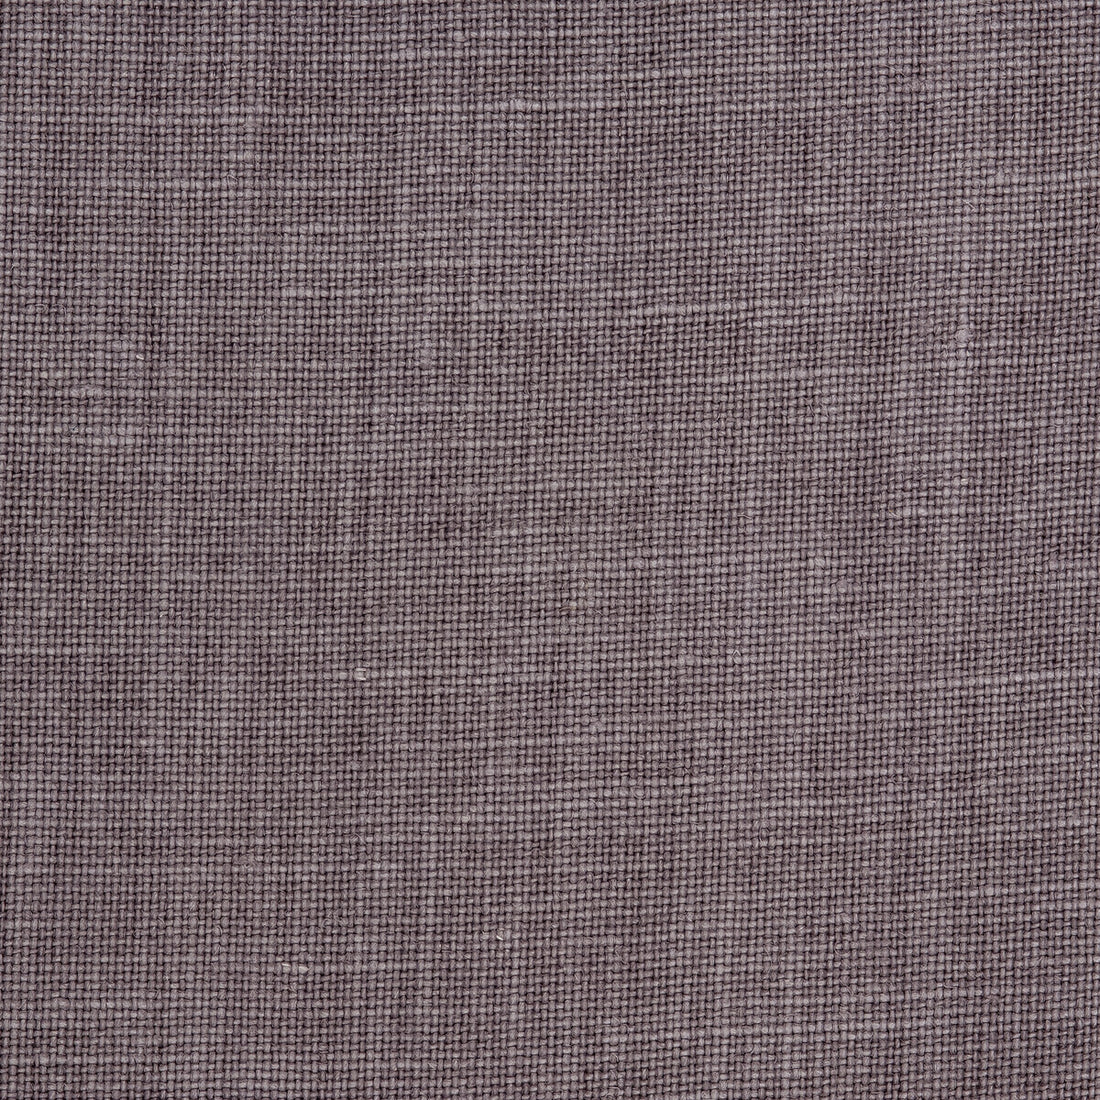 Weathered Linen fabric in heather color - pattern BF10962.587.0 - by G P &amp; J Baker in the Baker House Linens collection